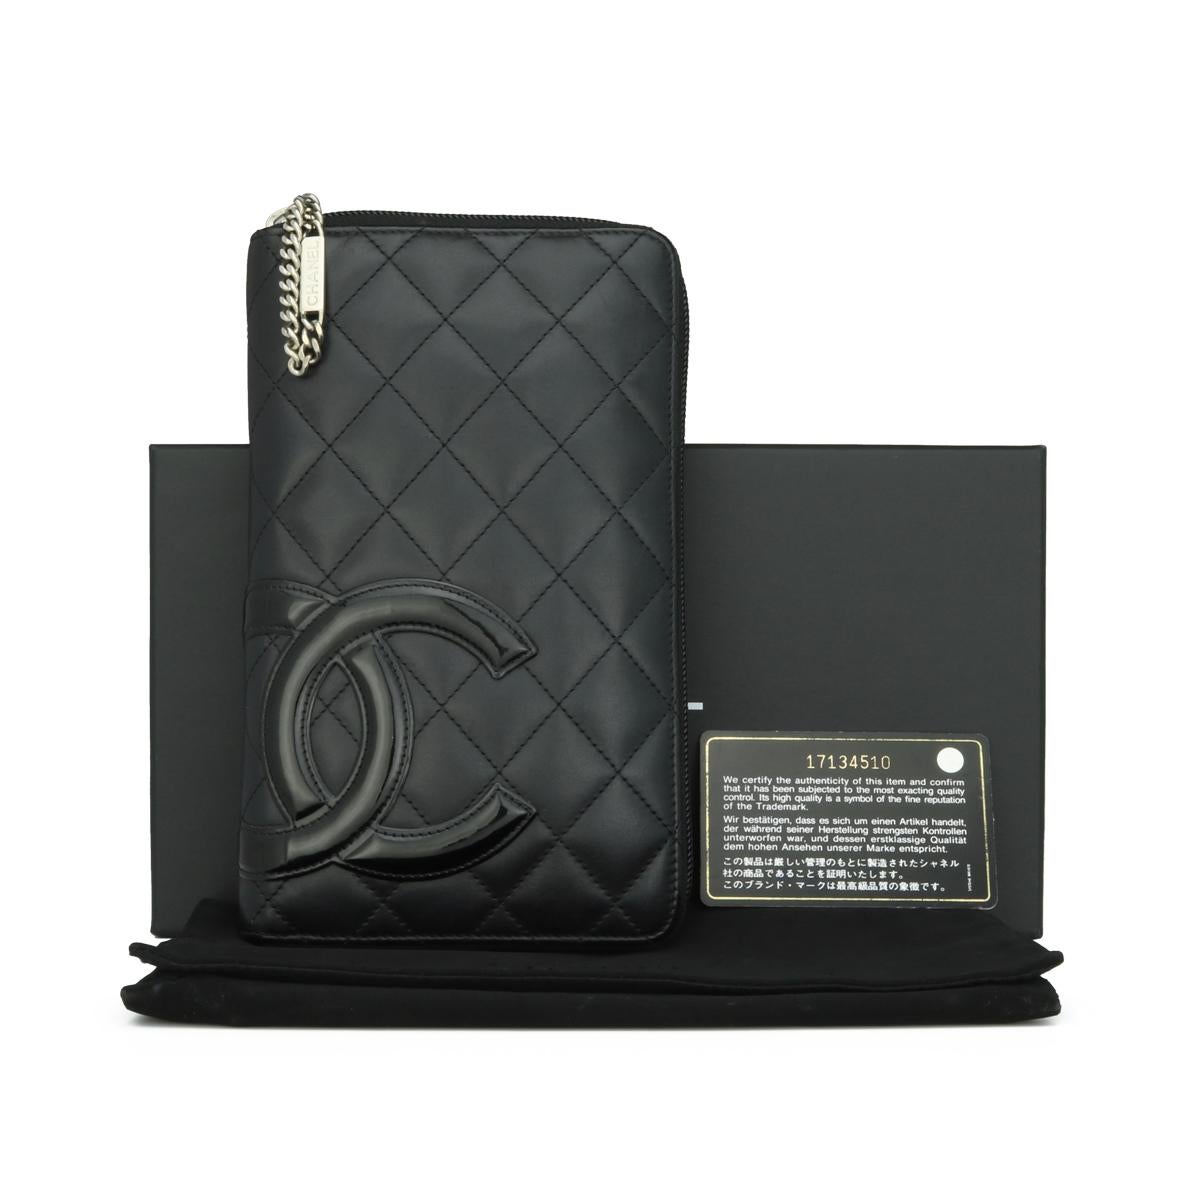 CHANEL Quilted Cambon Large Long Zipped Wallet Black Calfskin with Silver-Tone Hardware 2013.

This stunning large zipped wallet is in good condition. It still holds its original shape, and the hardware is still very shiny. It is such a gorgeous,